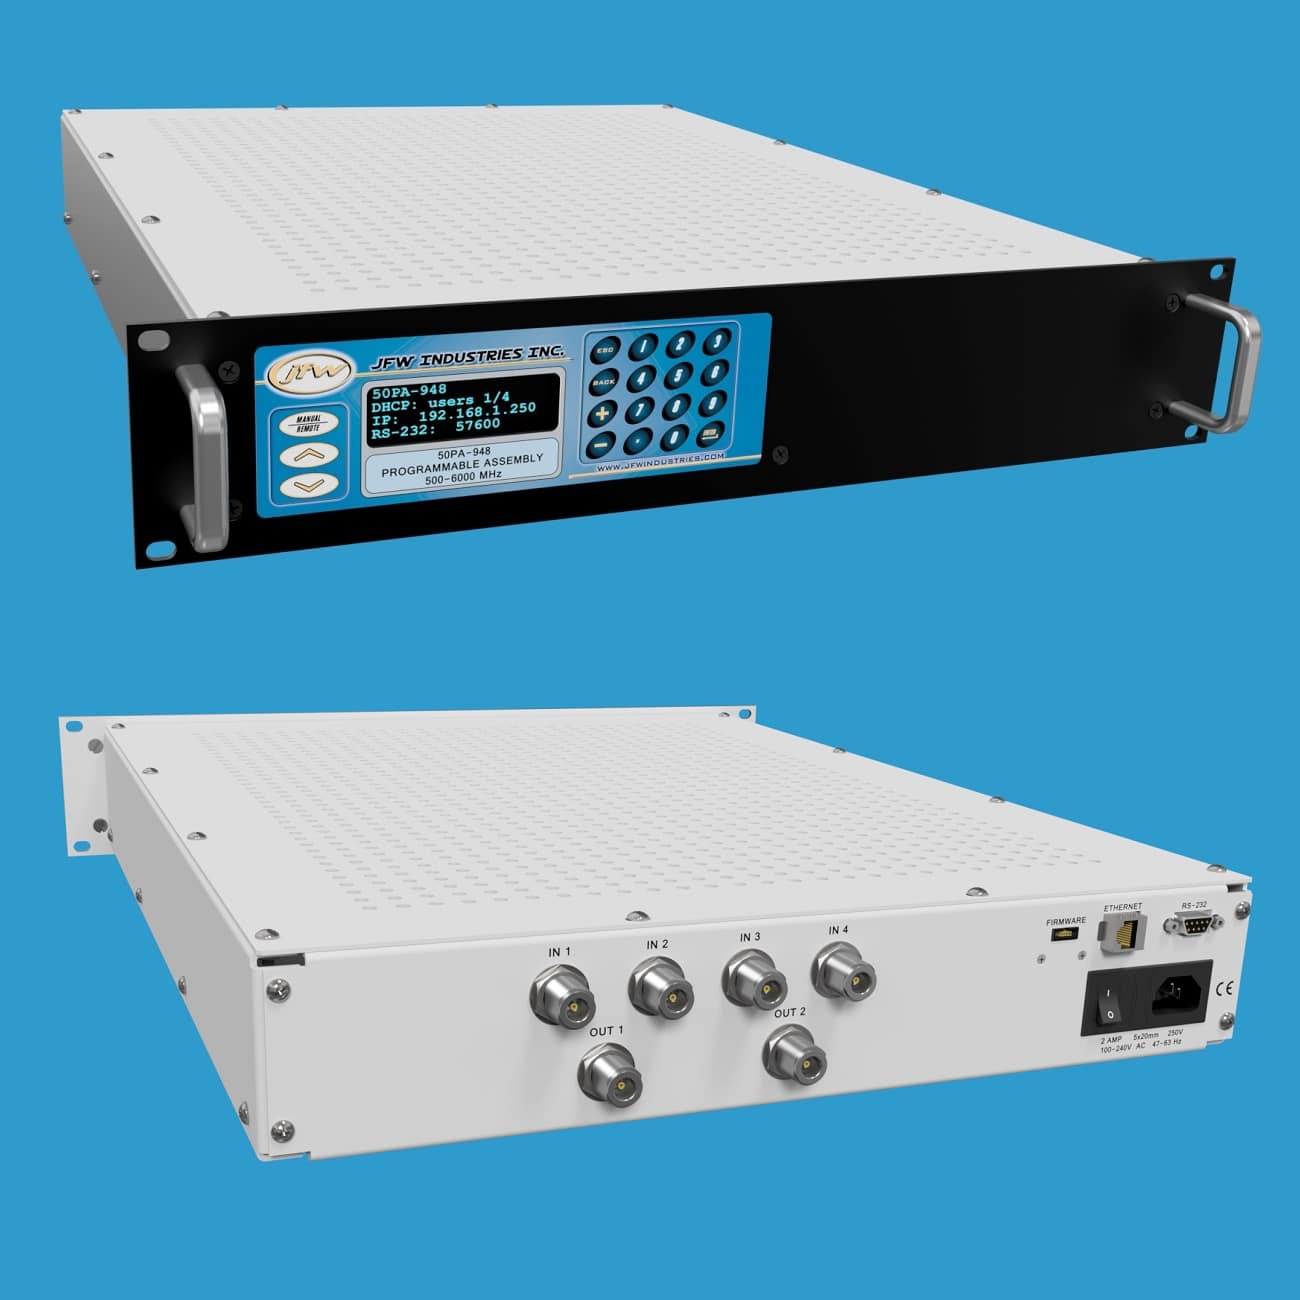 4 x 2 Handover Test System 0.5-6 GHz | 50PA-948 - JFW Industries